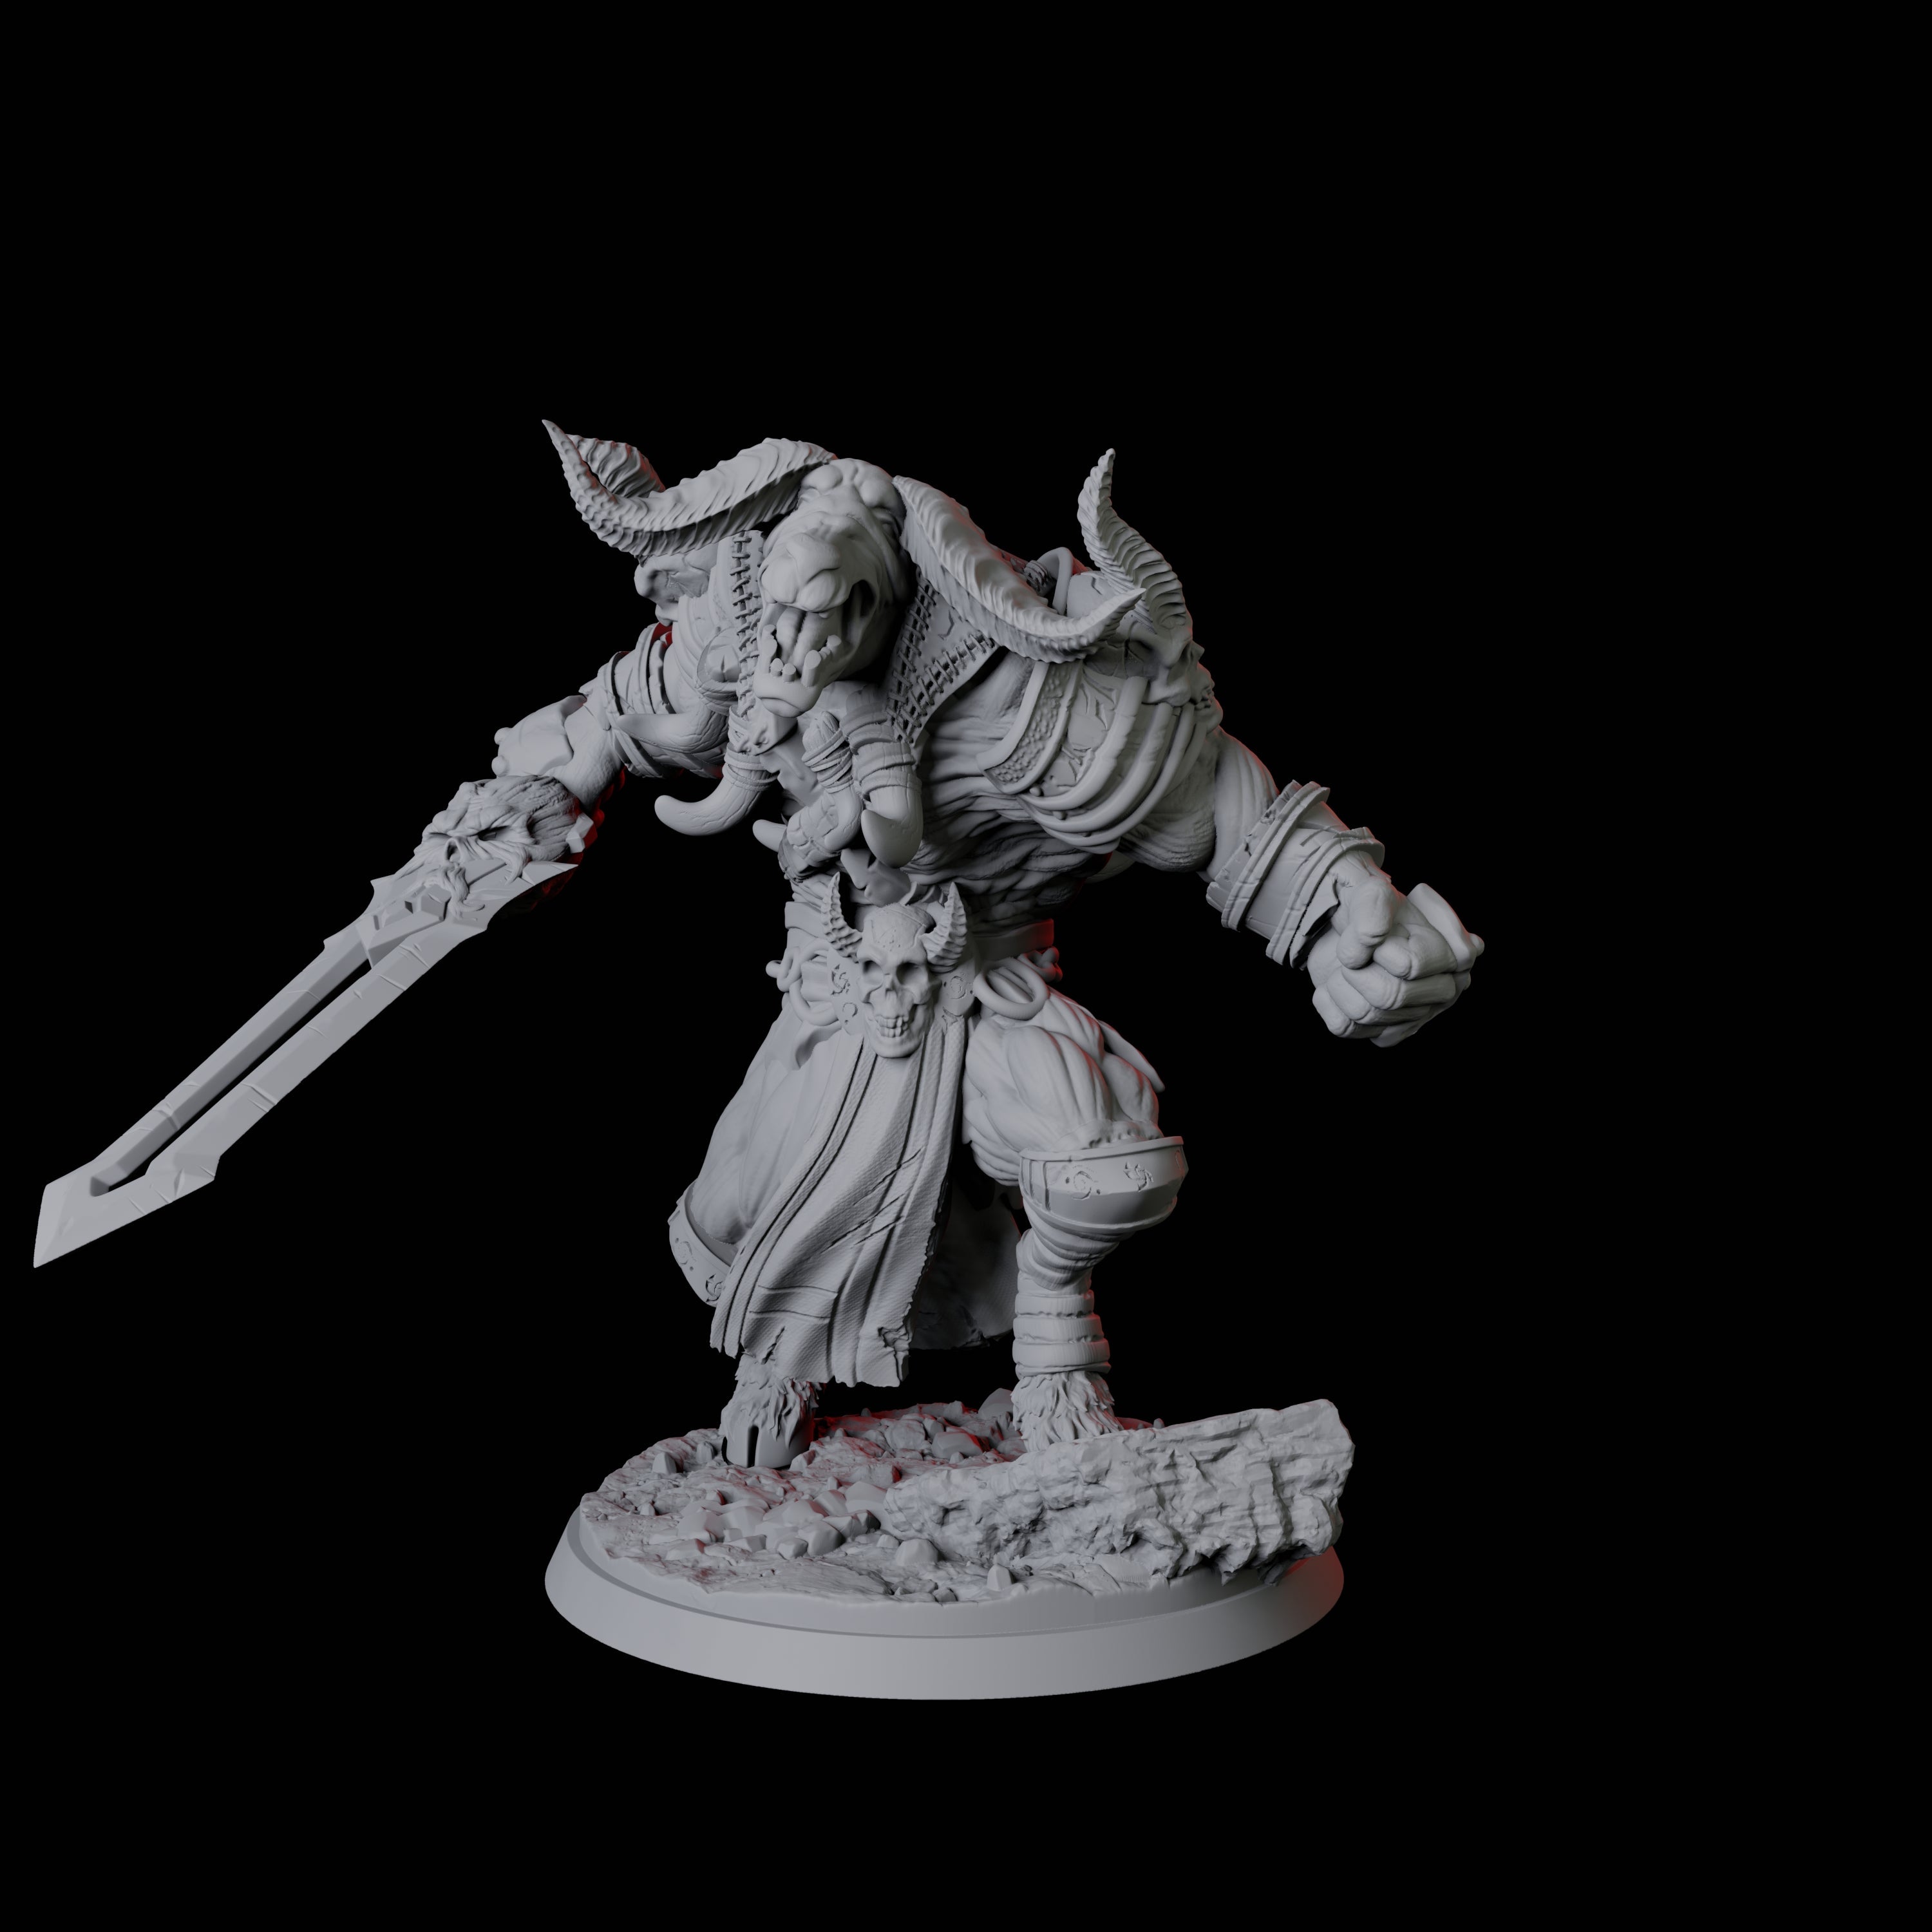 Roaring Yakfolk Fighter Miniature for Dungeons and Dragons, Pathfinder or other TTRPGs